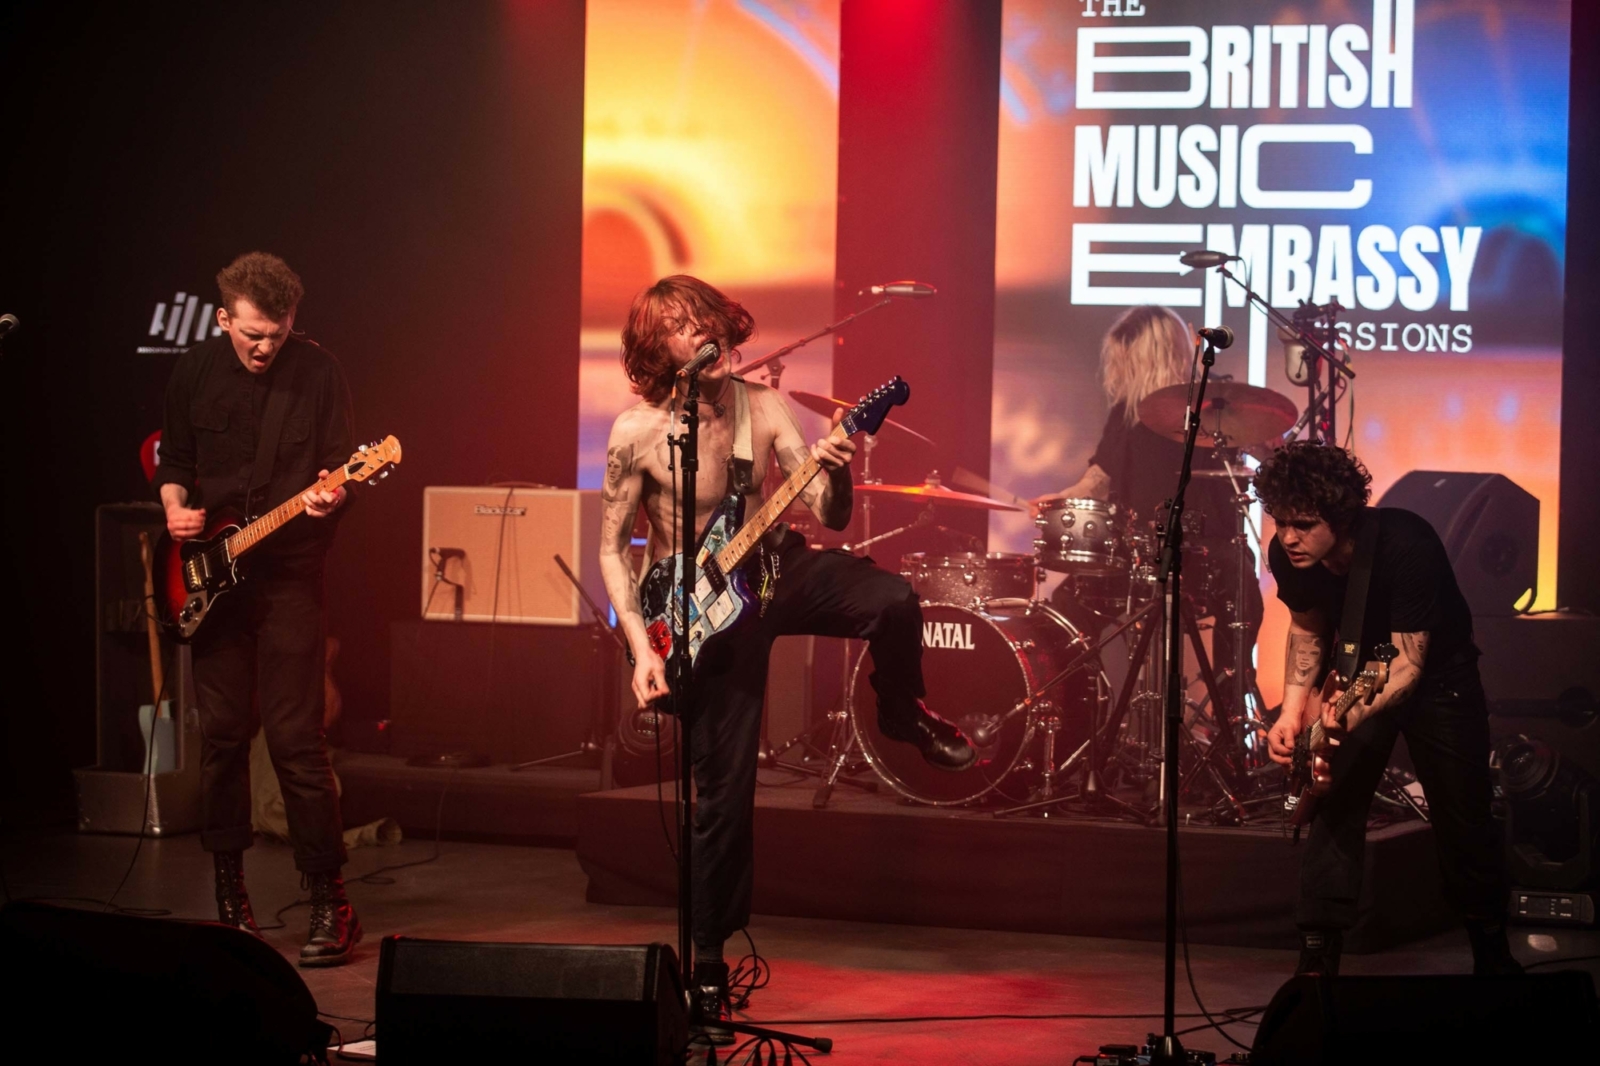 Relive King Nun's entire live set for the British Music Embassy Sessions